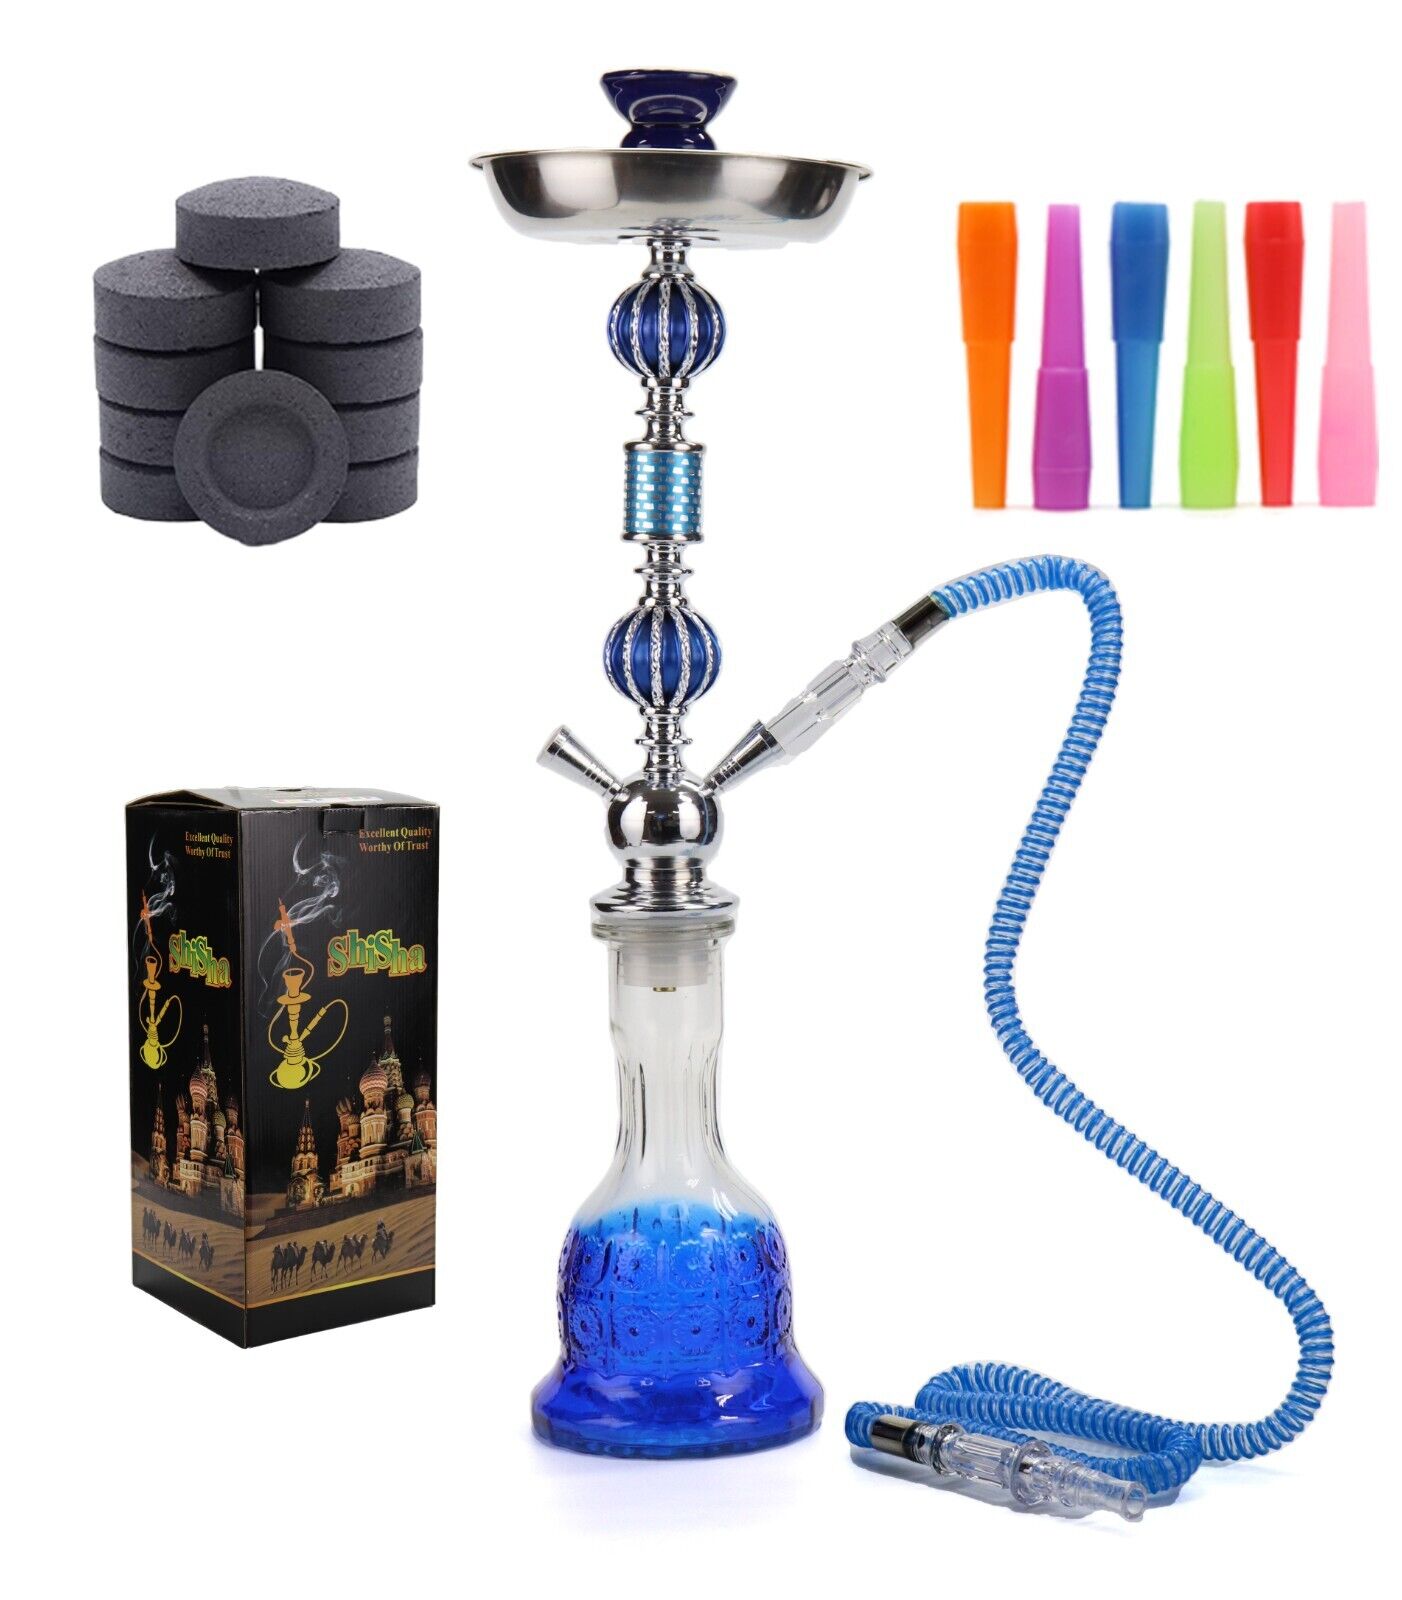 1-Hose Hookah 26 Waterpipe  Complete Set Shisha Coals + Tips w/box BLUE. Available Now for 44.95